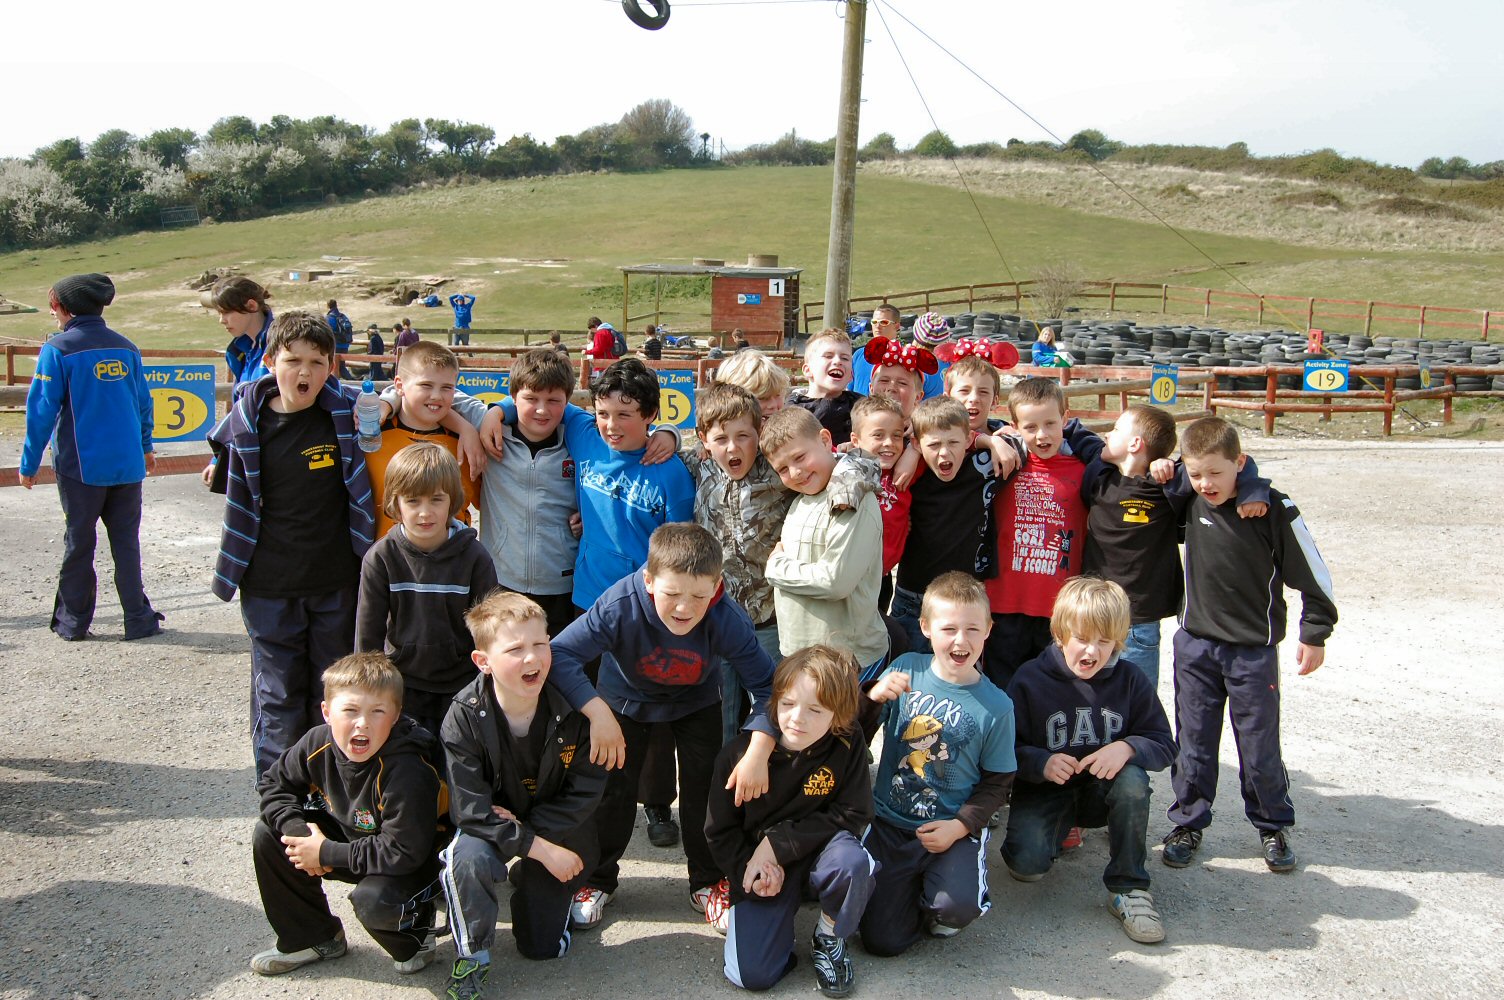 Tigers on Tour – Weymouth 2010